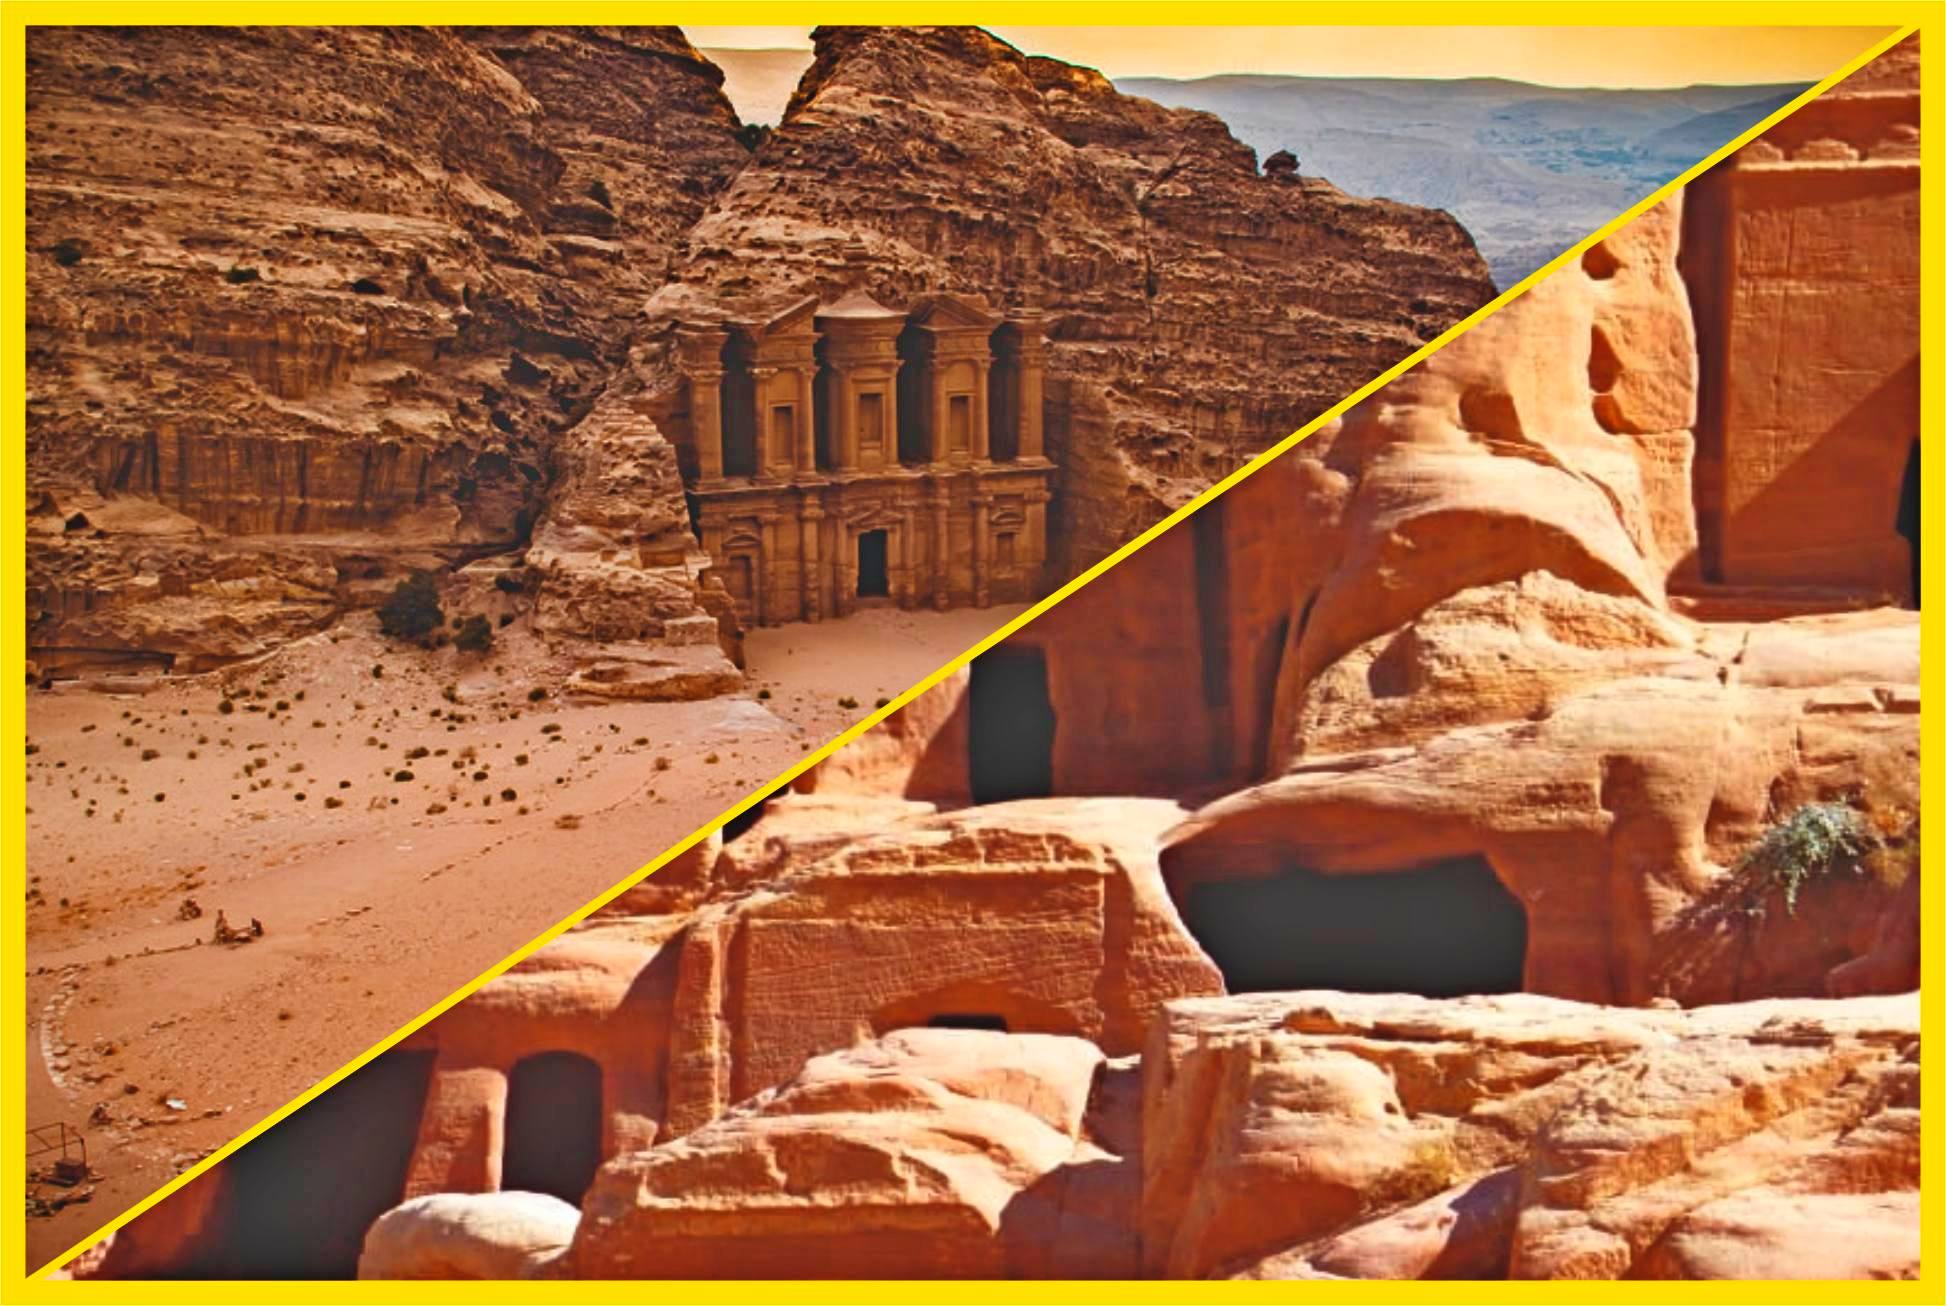 private tour; petra; al madras hidden road; high place of sacrifice; bedouin settlement; caravans route; via jordan travel & tours; jordan; travel; tour; experience; explore; adventure; ancient; history; culture; ruins; archaeological site; historical; jordanian; guide; hidden gems; unique; off the beaten path; middle east; hike; sightseeing; adventure travel; local; traditional; authentic; road less traveled; memorable; bespoke; tailor-made; personalized; discovery; local culture; custom; exclusive; wild; nature; wilderness; undiscovered; extraordinary; scenic; landscape; group tour; solo; couple; family; friends; vacation; holiday; explore Jordan; unmissable; once-in-a-lifetime; unforgettable; guided tour; tailored experience; off-road; wilderness trek; conservation; historical preservation; sustainable tourism; cultural immersion; local community; conservation efforts; hidden secrets; bucket list; vacation package; local cuisine; hospitality; expert guide.